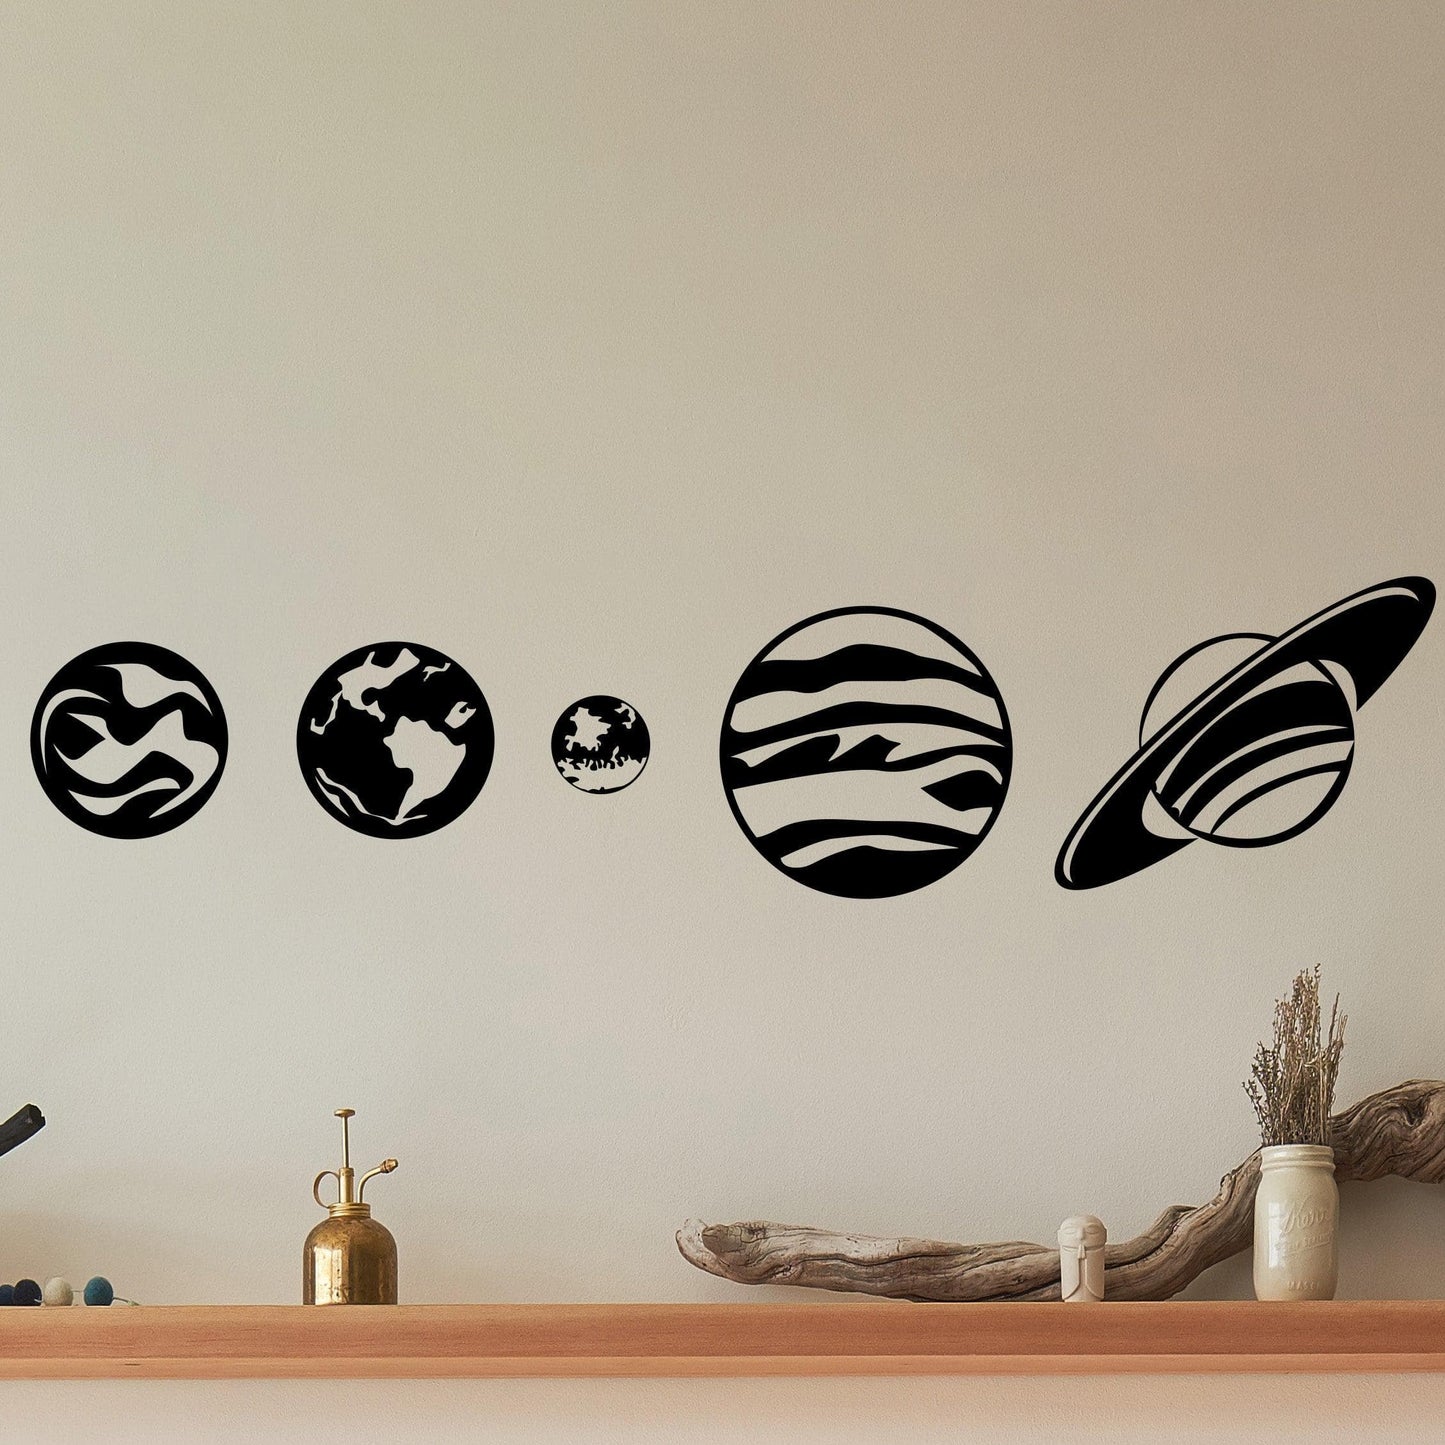 Solar System Wall Decal. Planets Wall Sticker. #OS_MG458